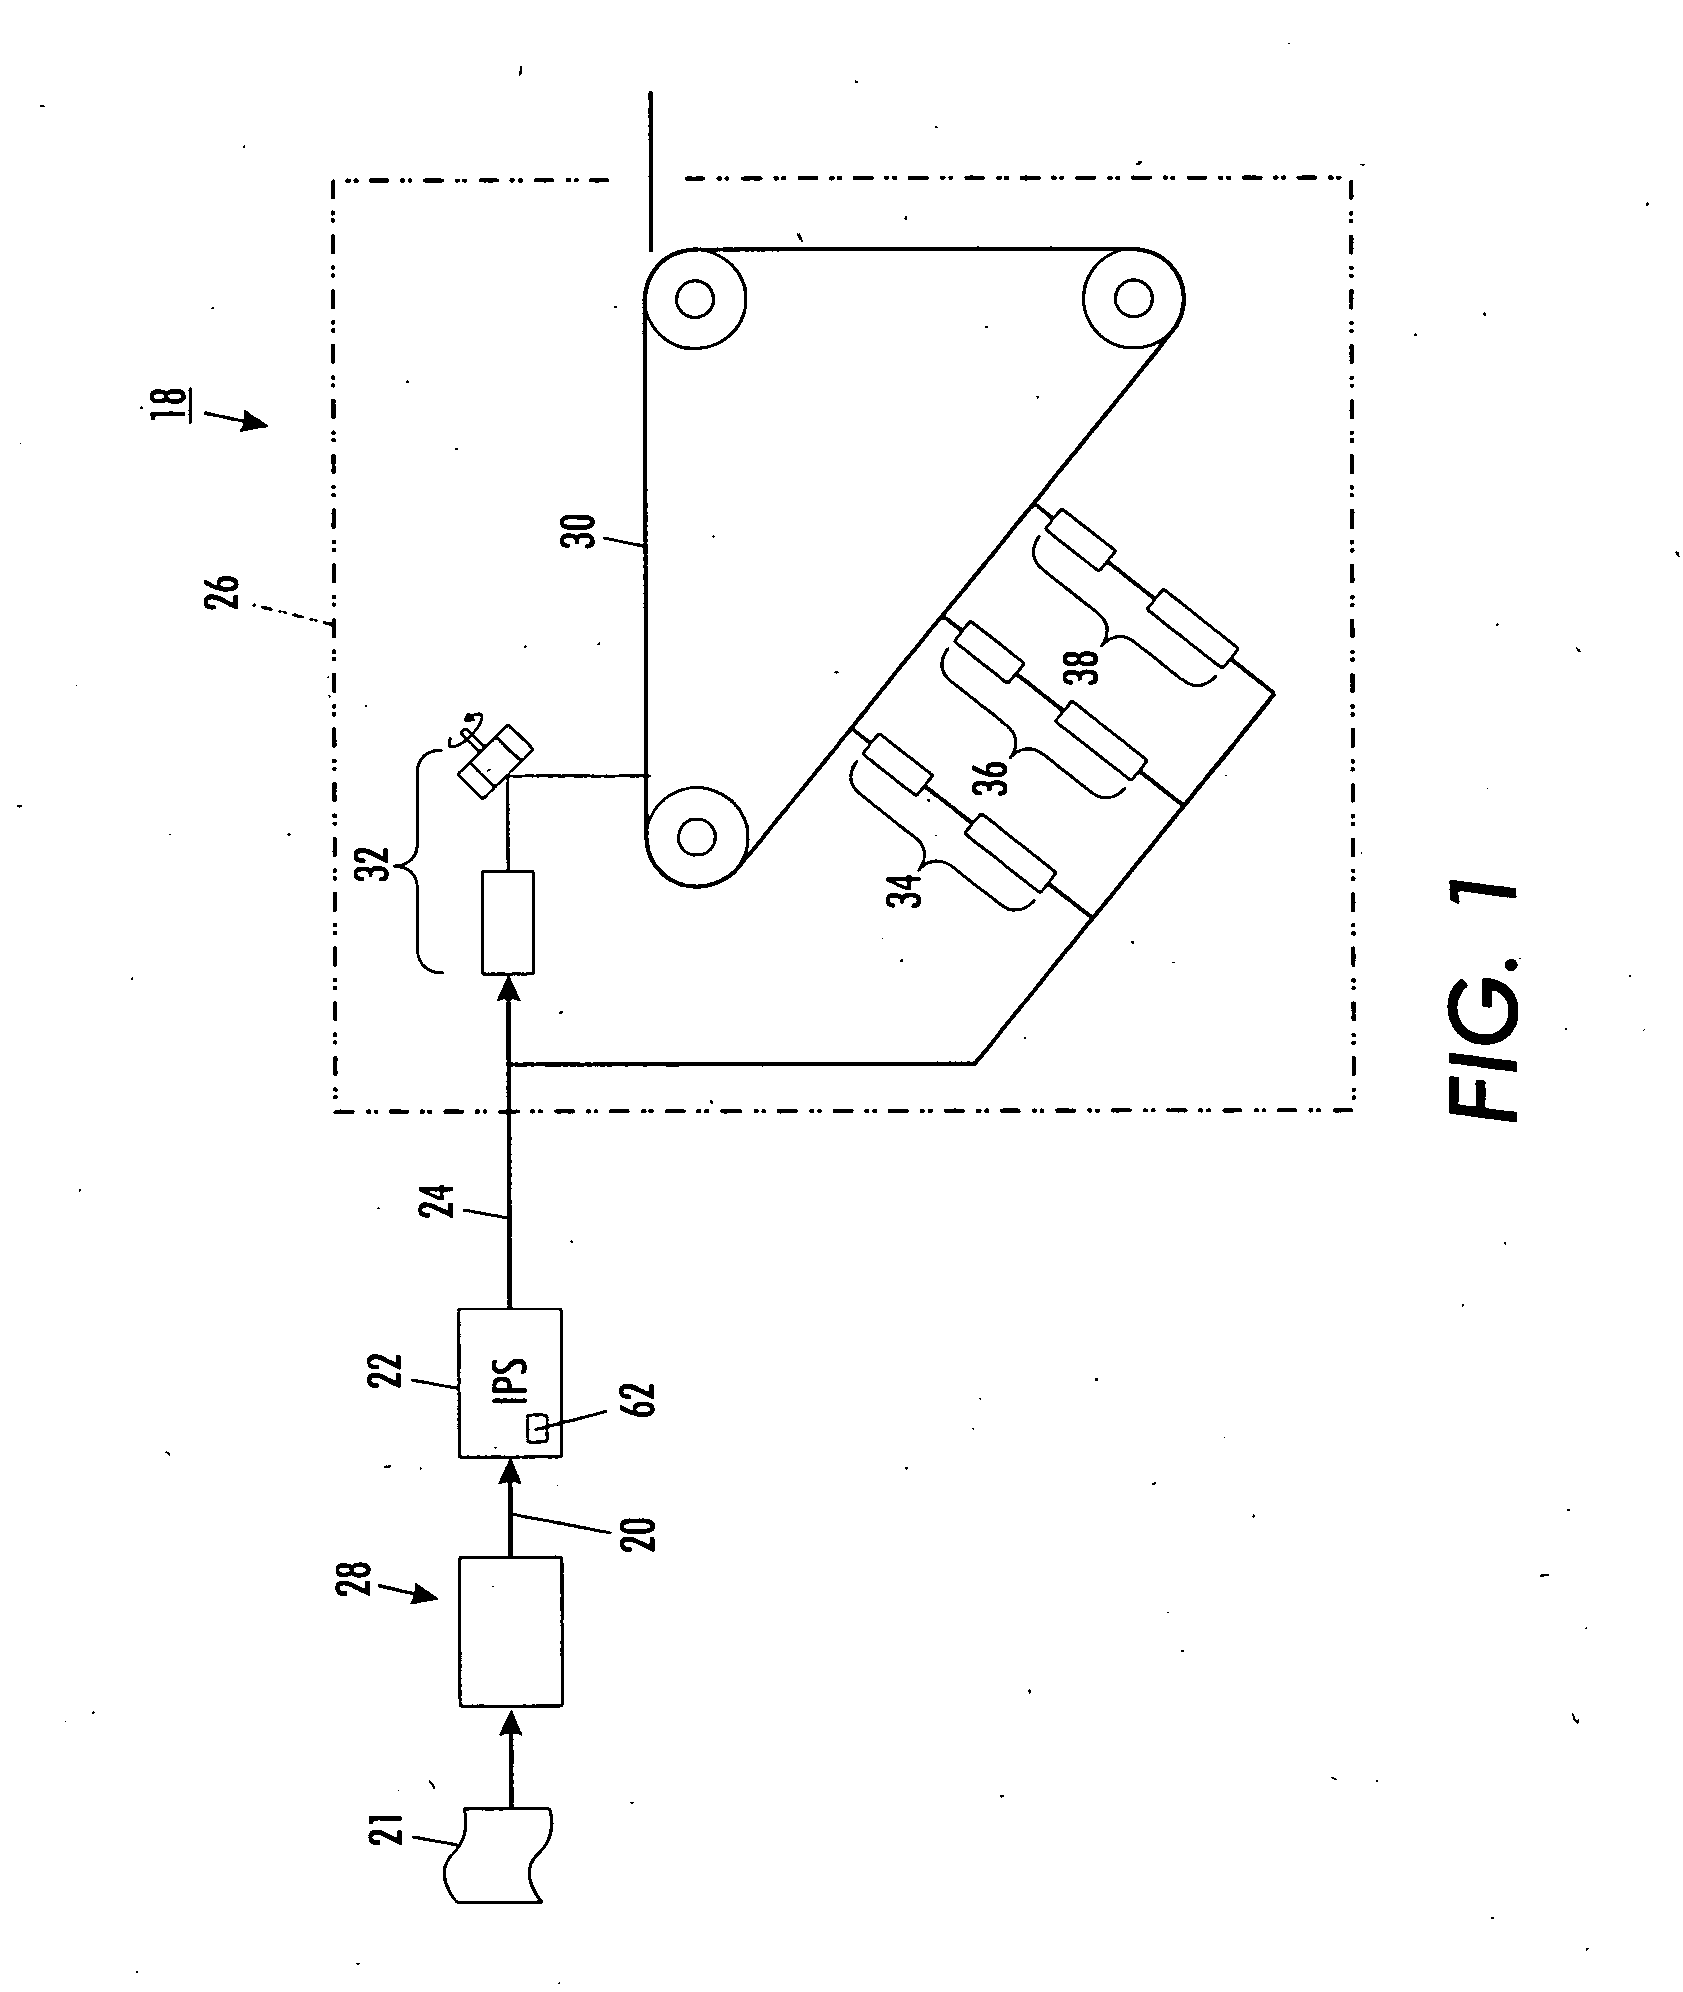 Systems and methods for measuring uniformity in images